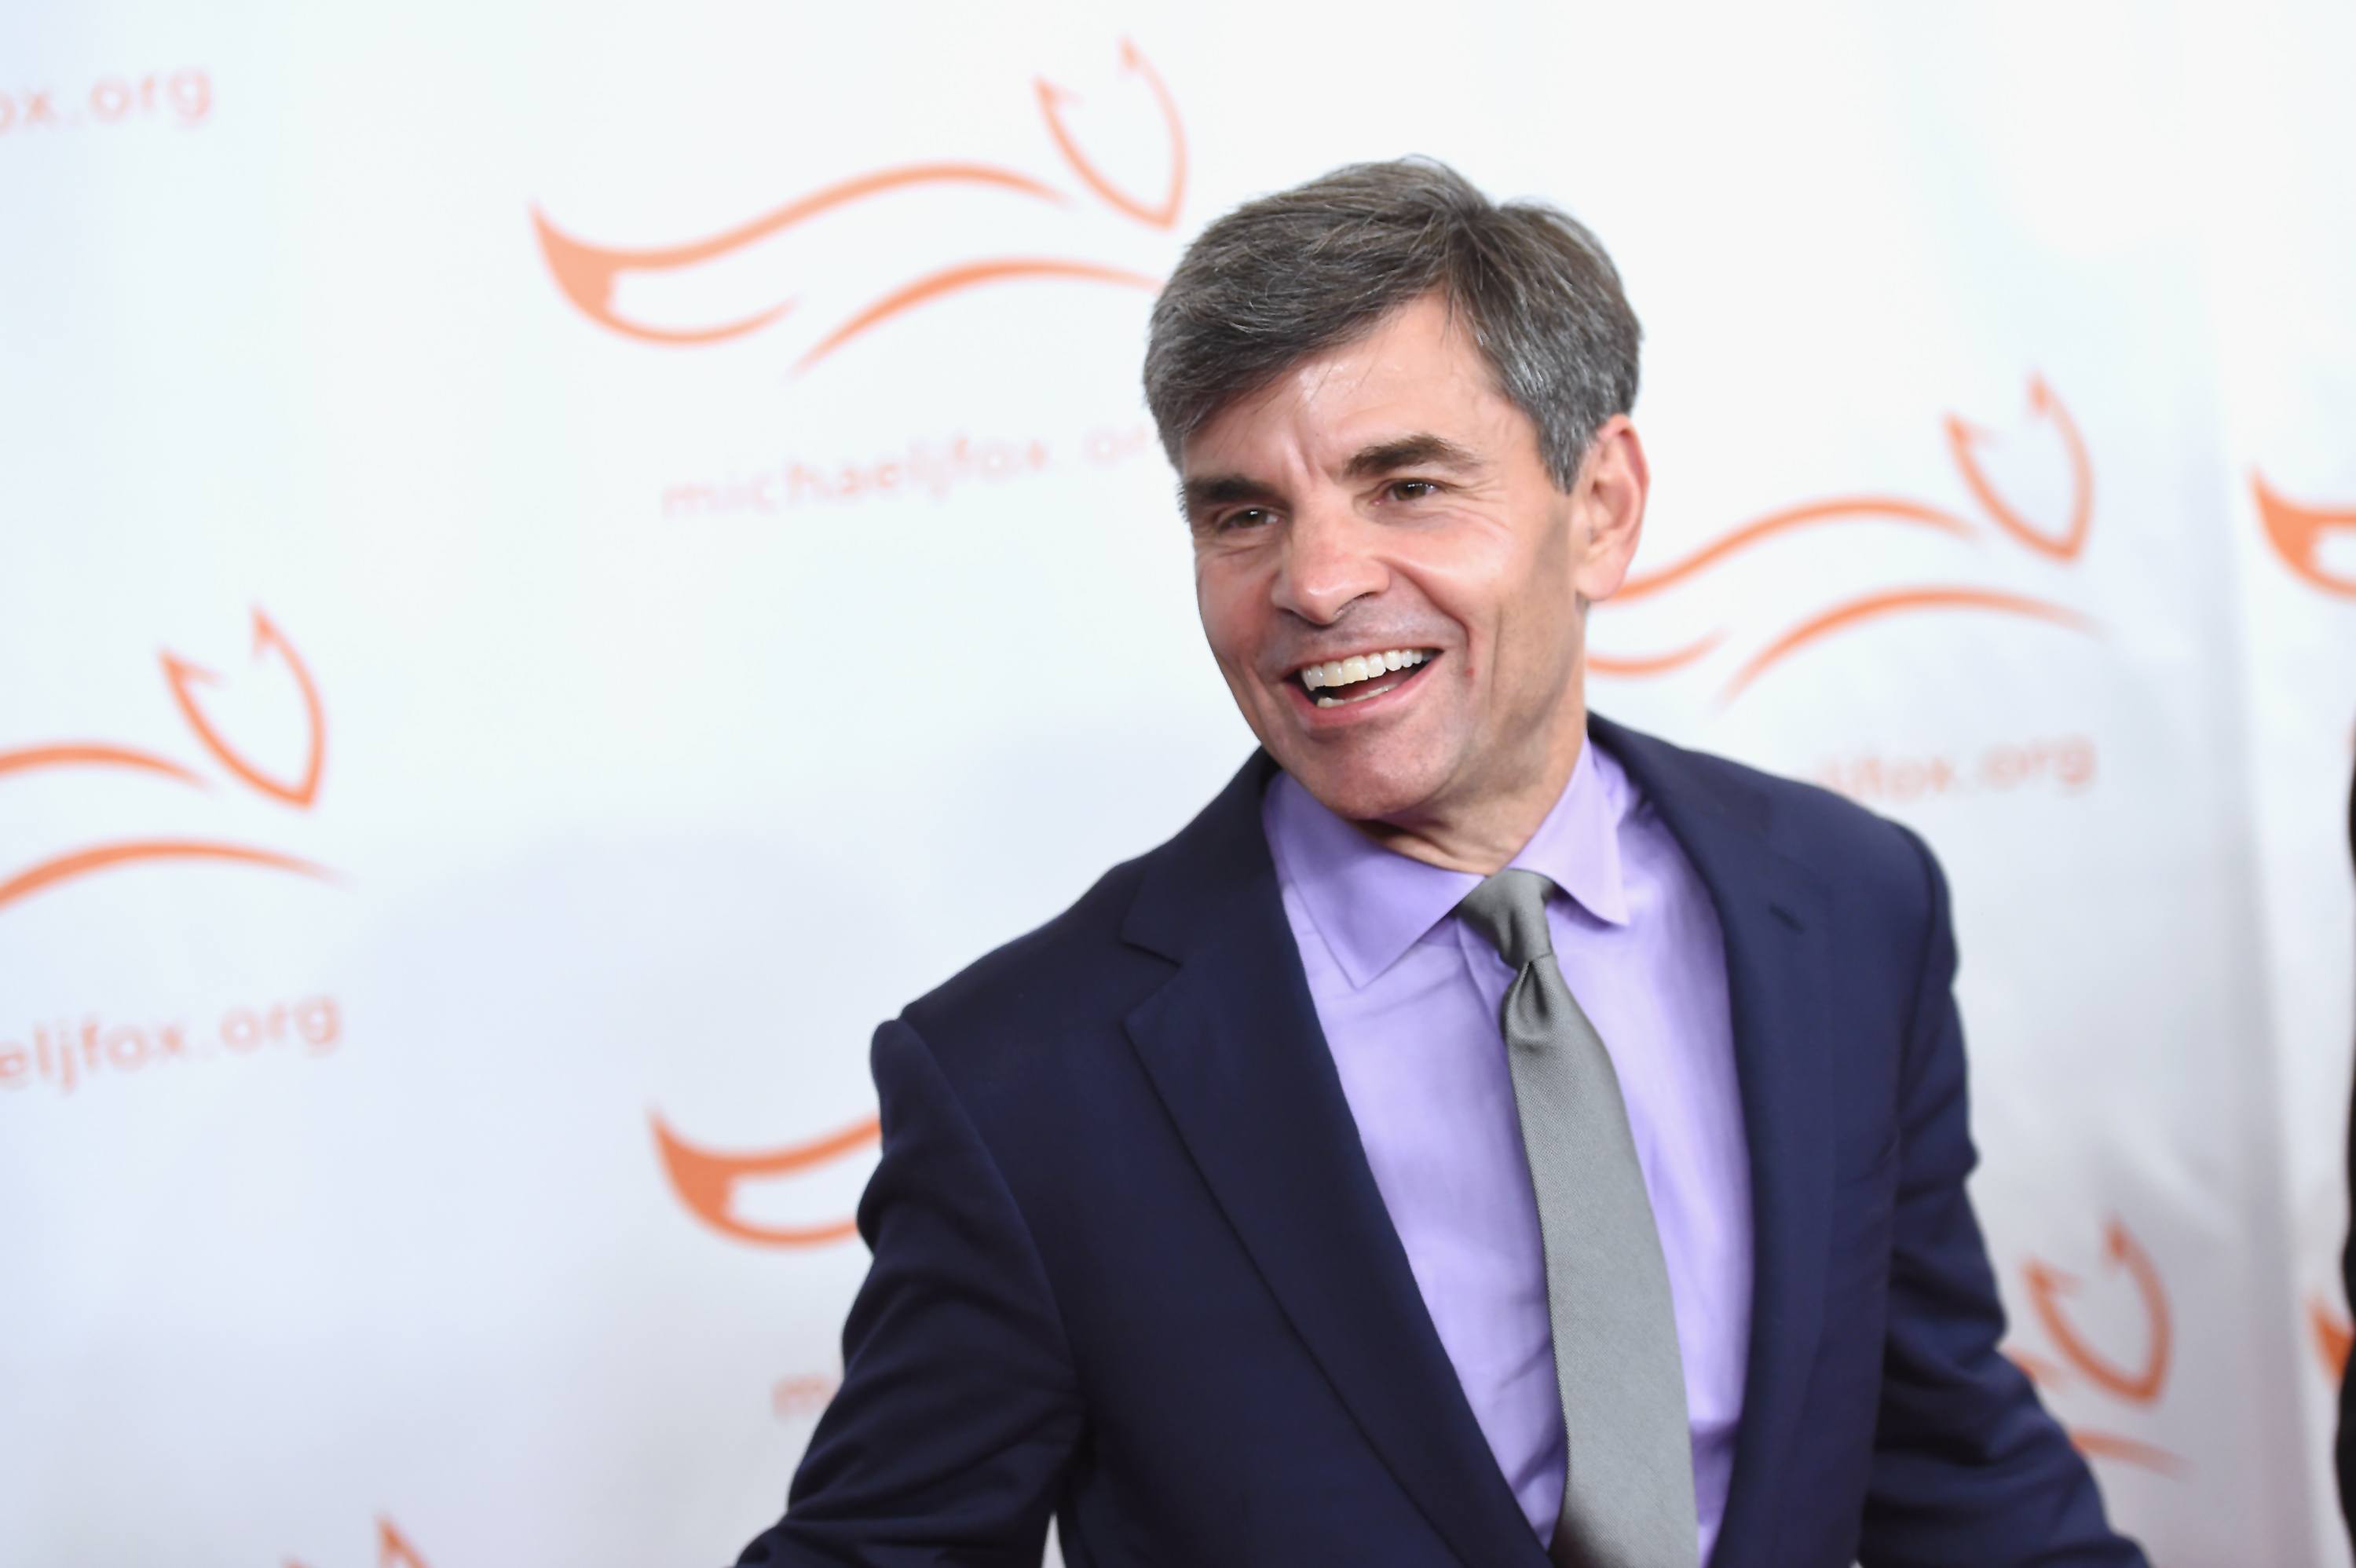 NEW YORK, NY - NOVEMBER 11: George Stephanopoulos on the red carpet of A Funny Thing Happened On The Way To Cure Parkinson's benefitting The Michael J. Fox Foundation at the Hilton New York on November 11, 2017. (Photo by Nicholas Hunt/Getty Images)